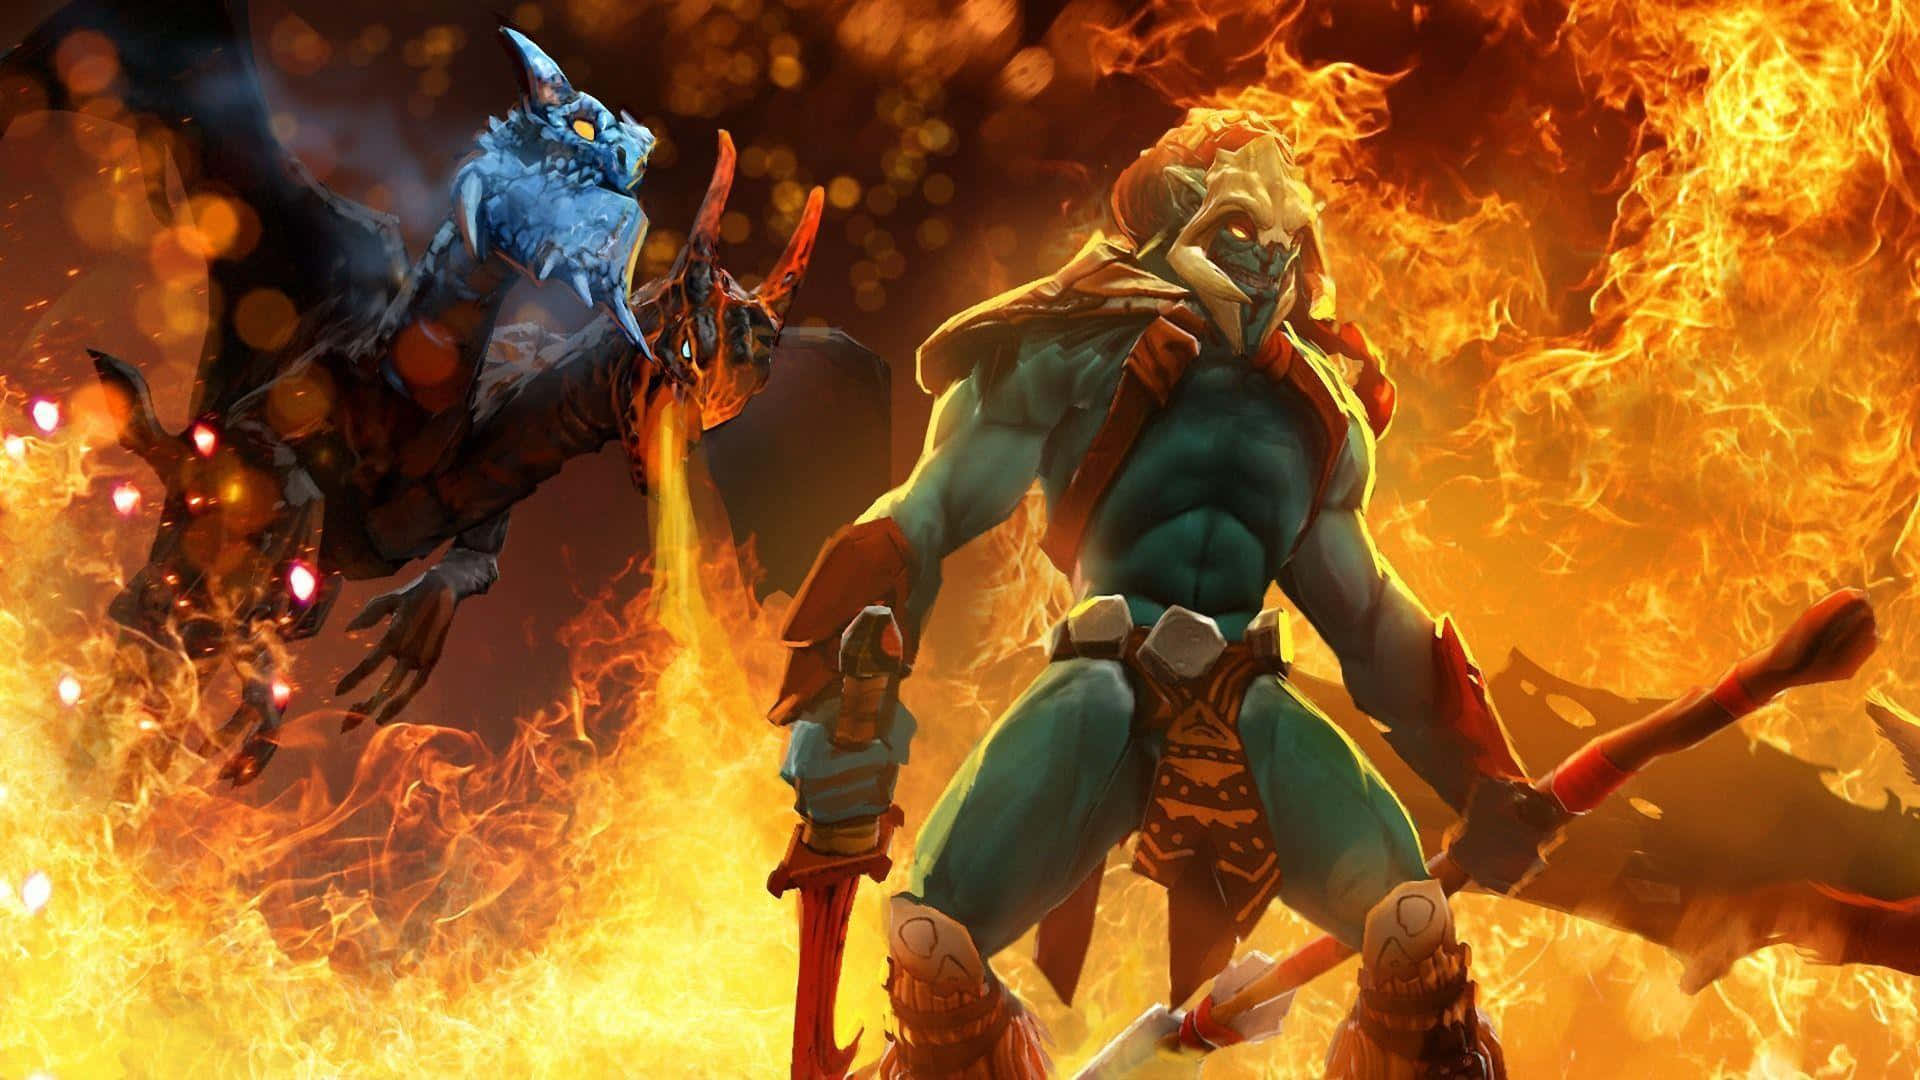 Epic battle in the Dota 2 arena